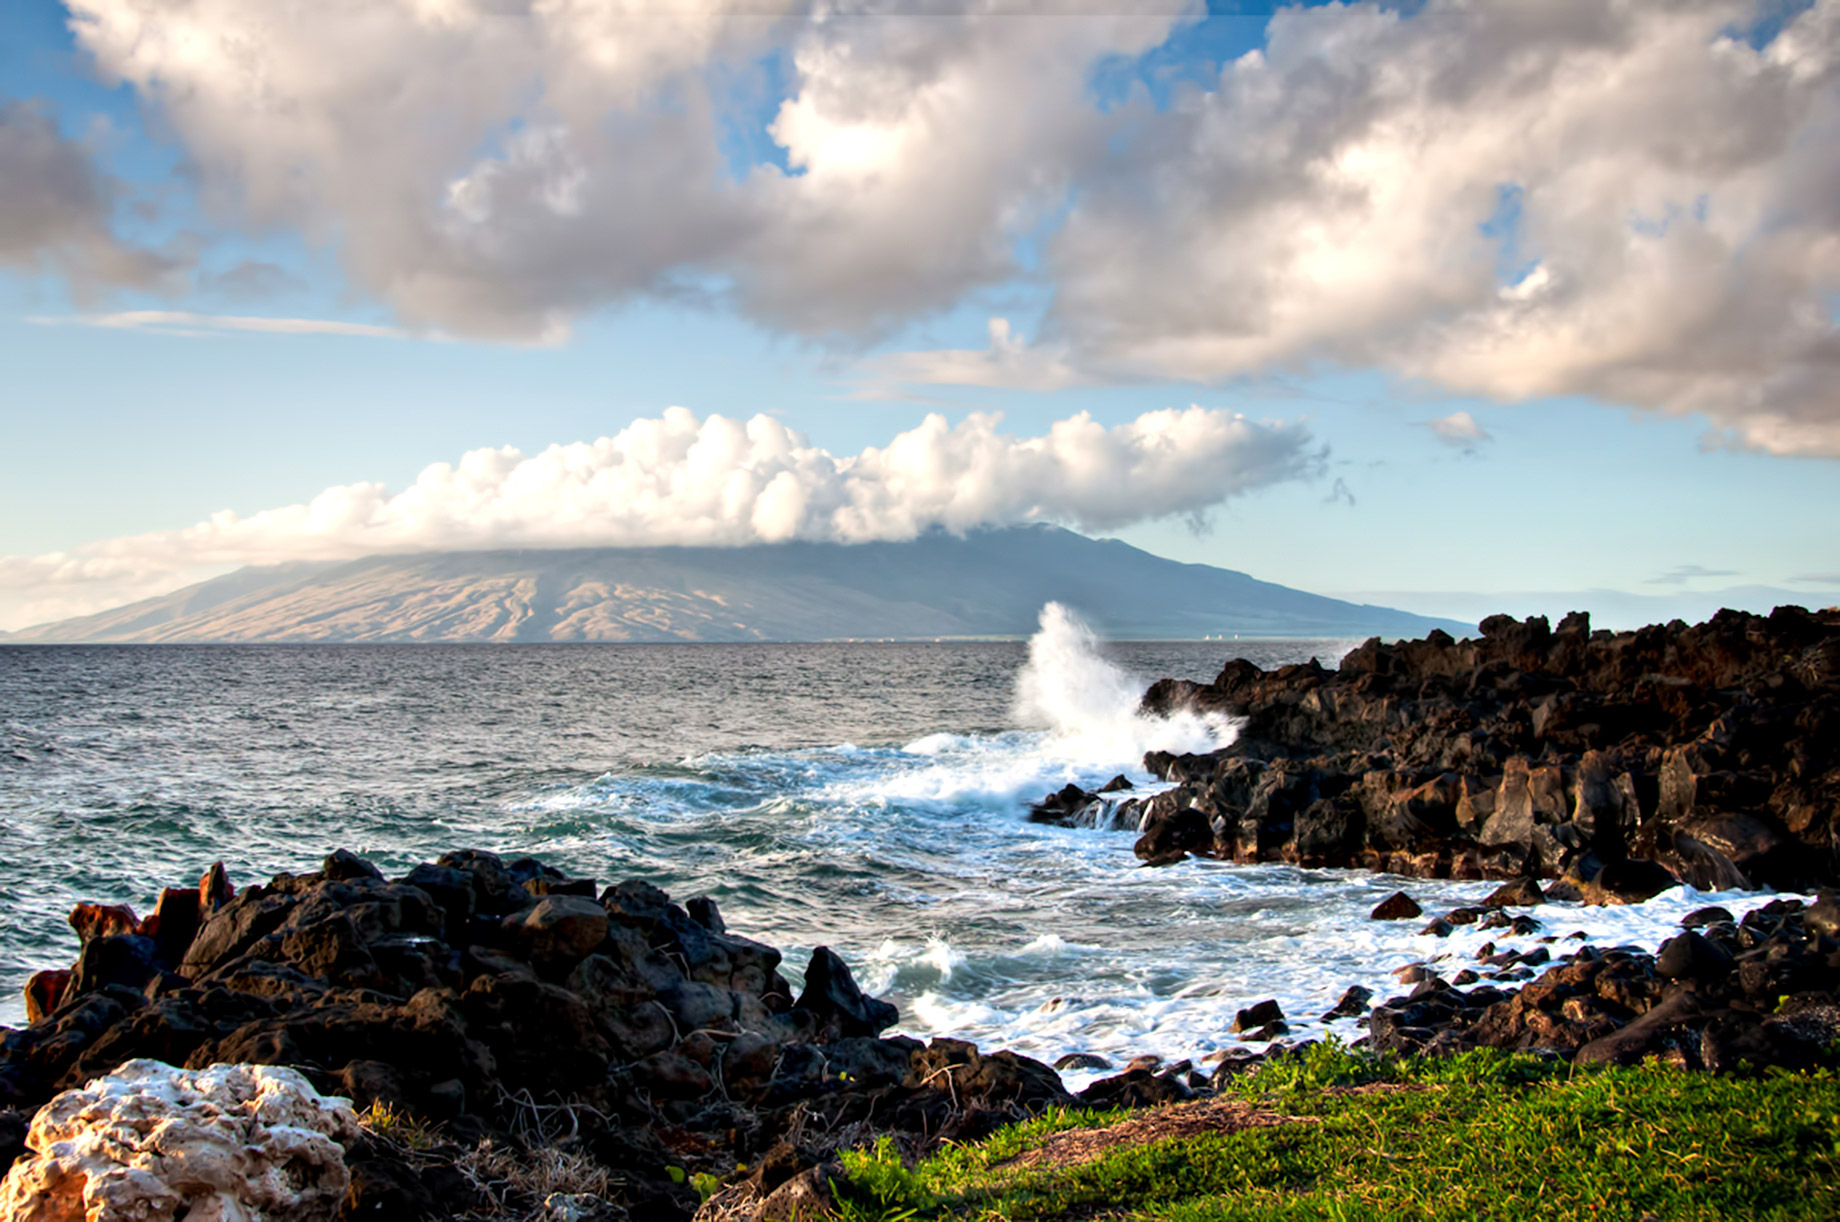 Beach View of Lanai Island in Hawaii - Lanai - The Most Expensive Private Island Real Estate Transaction in History